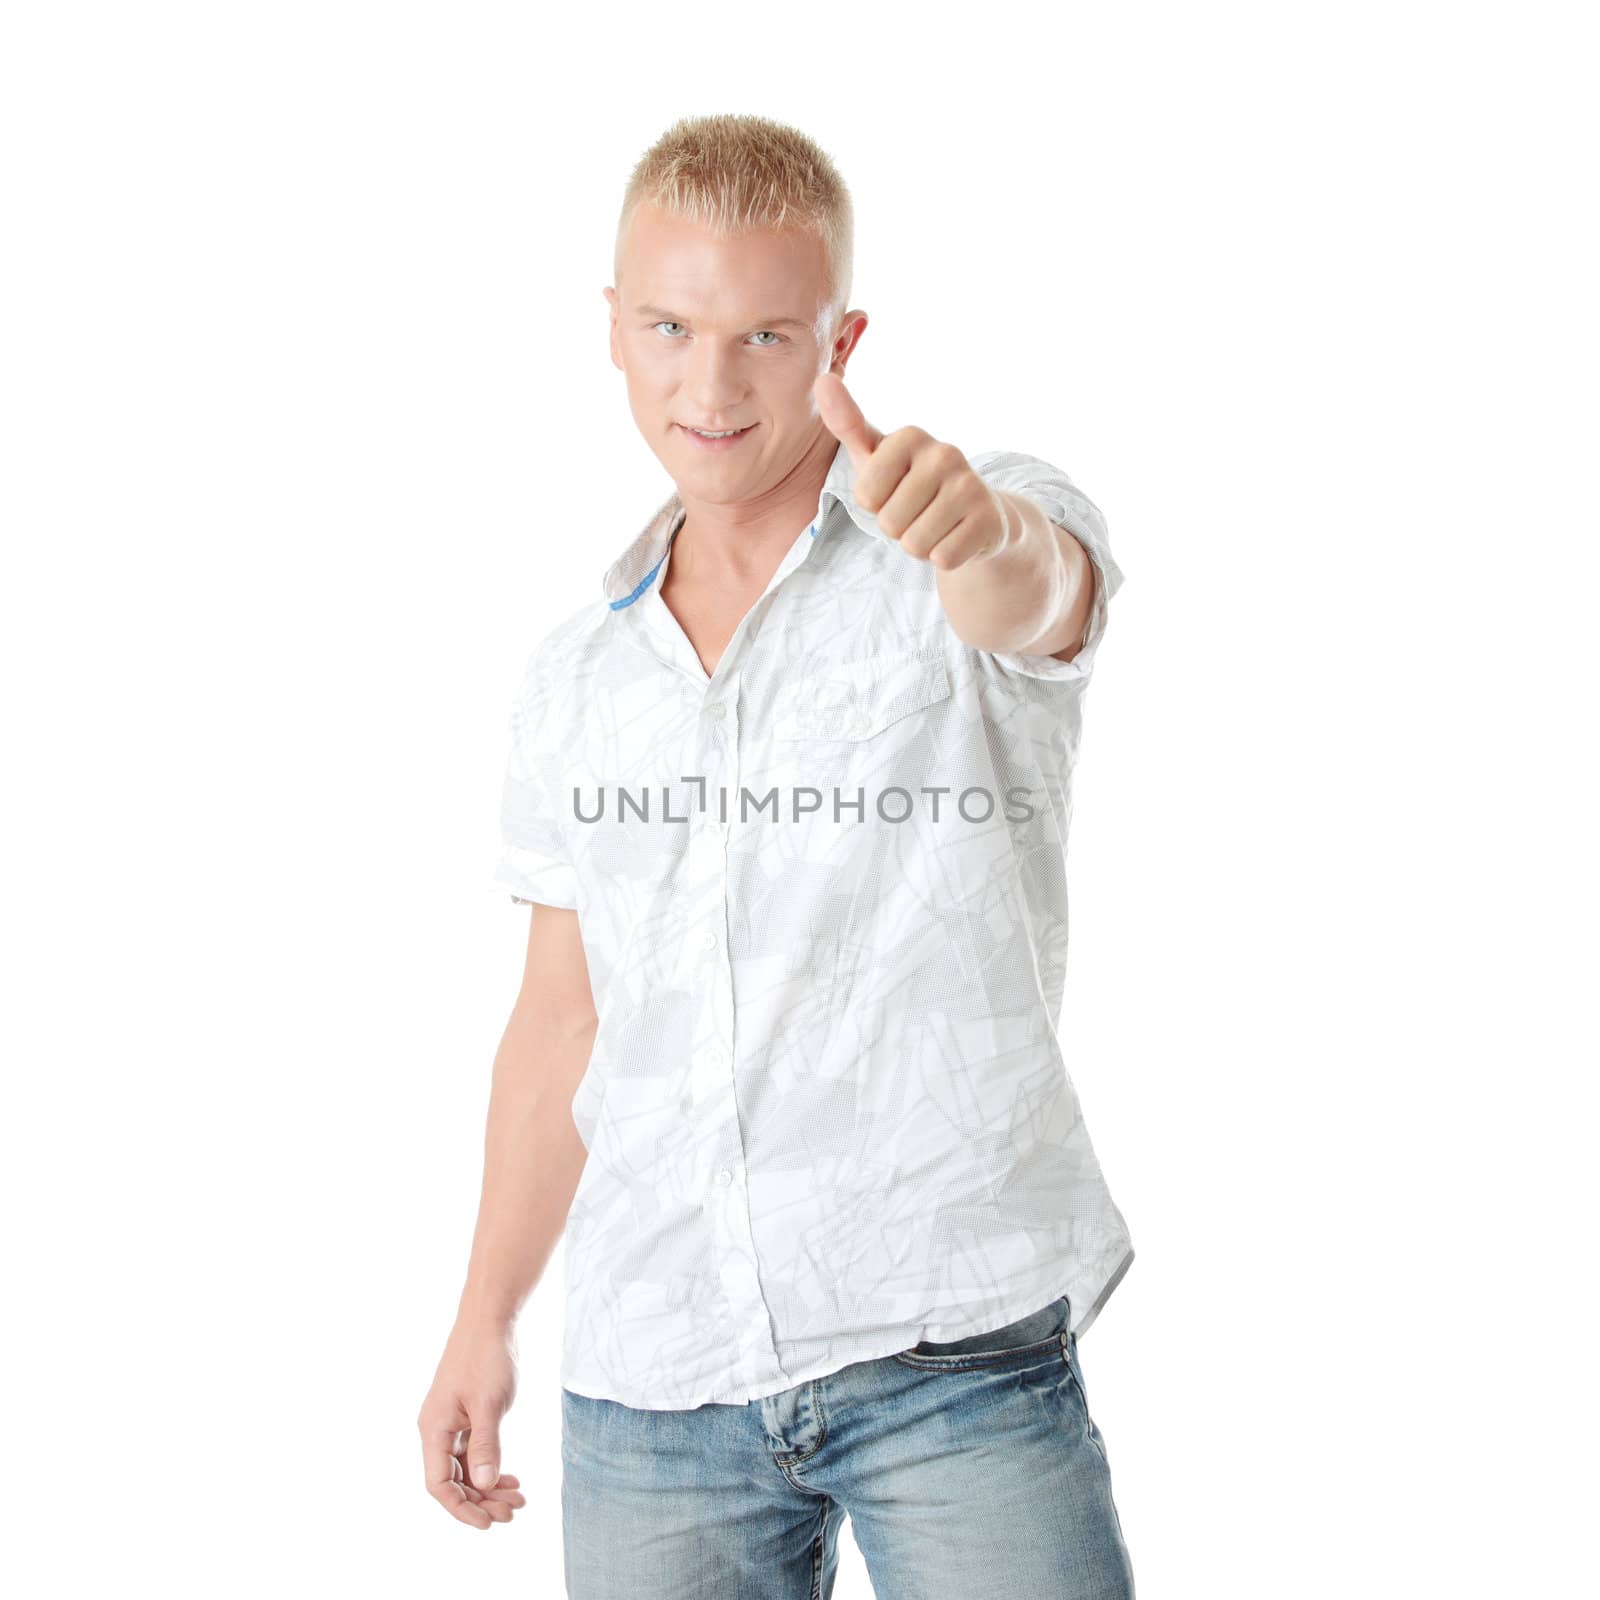 Young casual man portrait doing the thumbs up sign in a white background